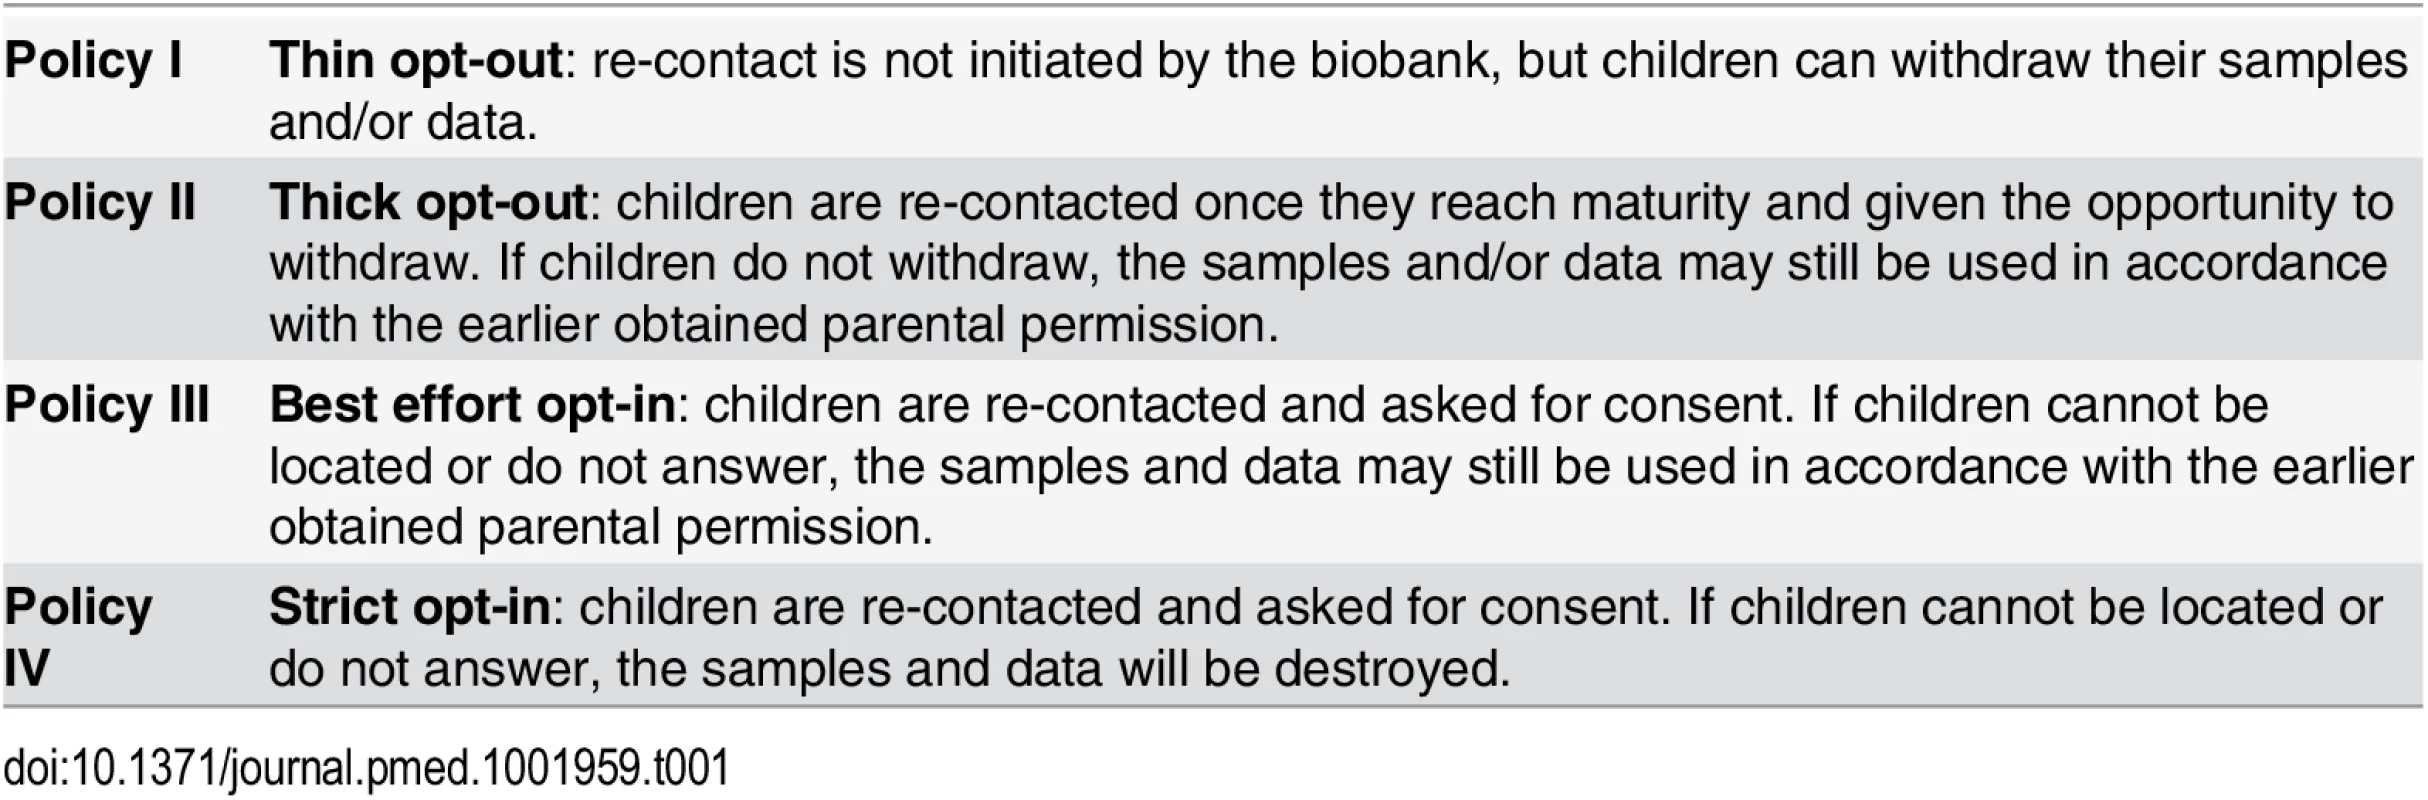 Re-contact policies for biobanks.